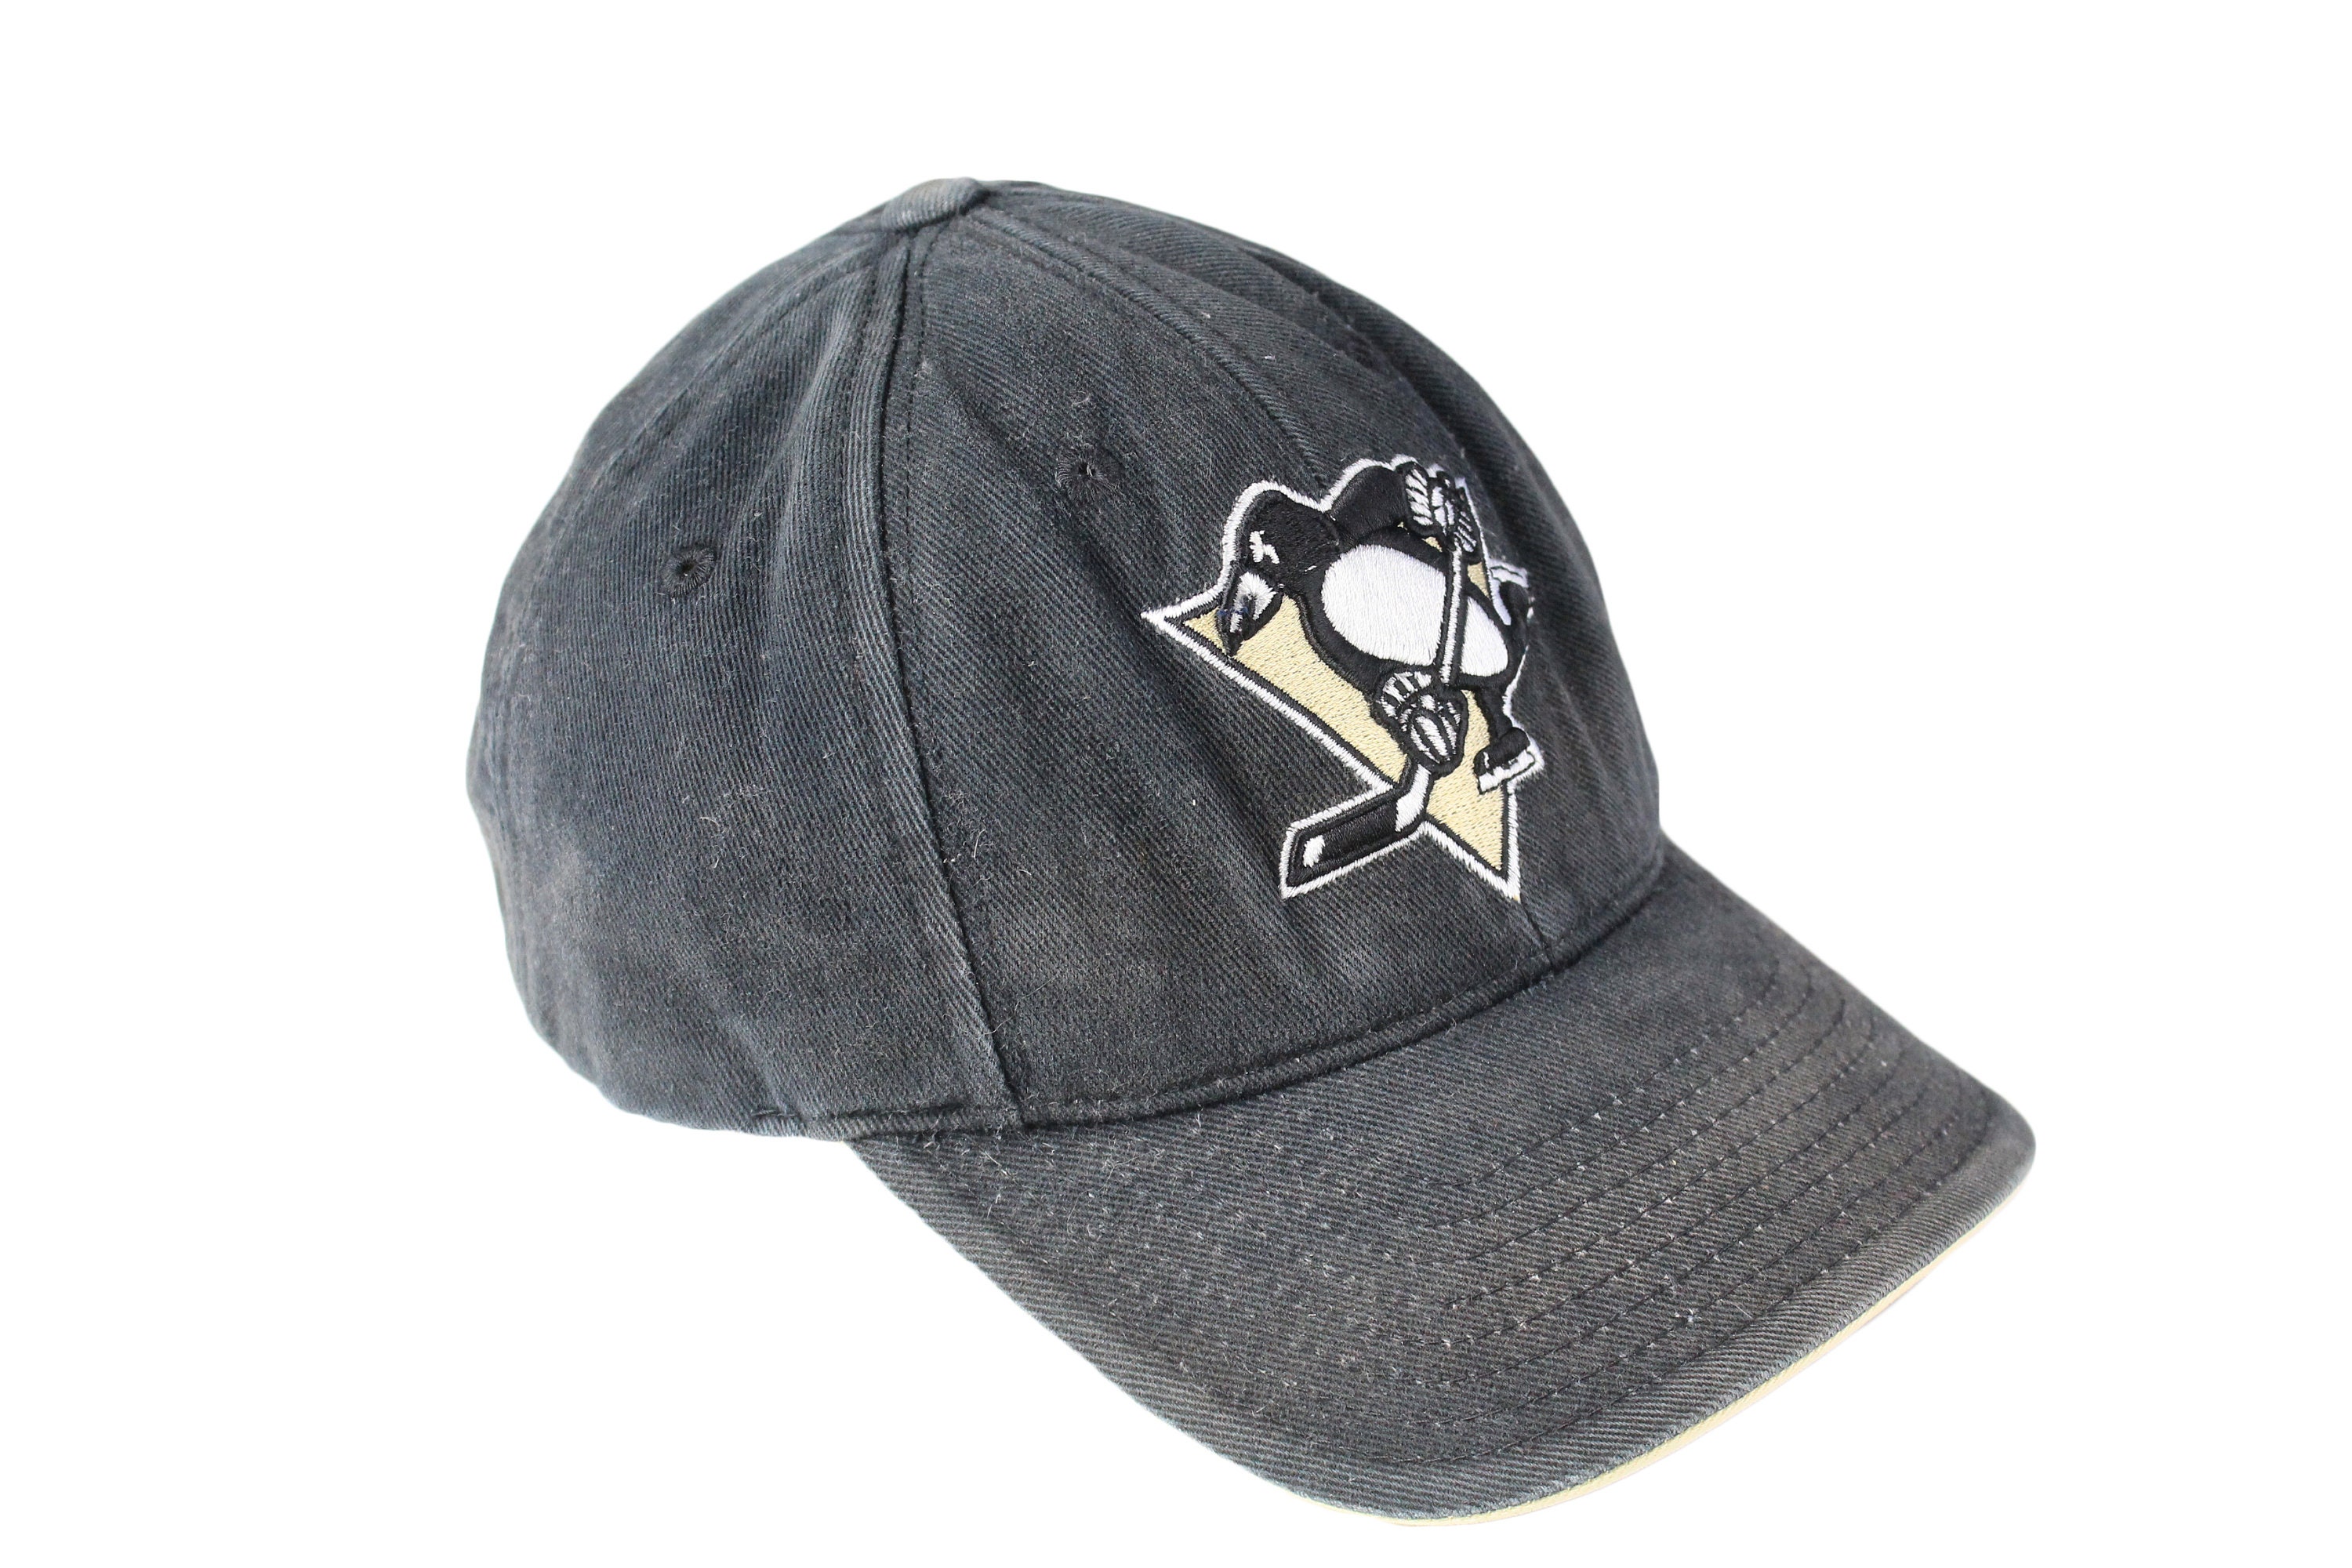 Reebok Pittsburgh Penguins Hat Center Ice Pens Logo Adult Small